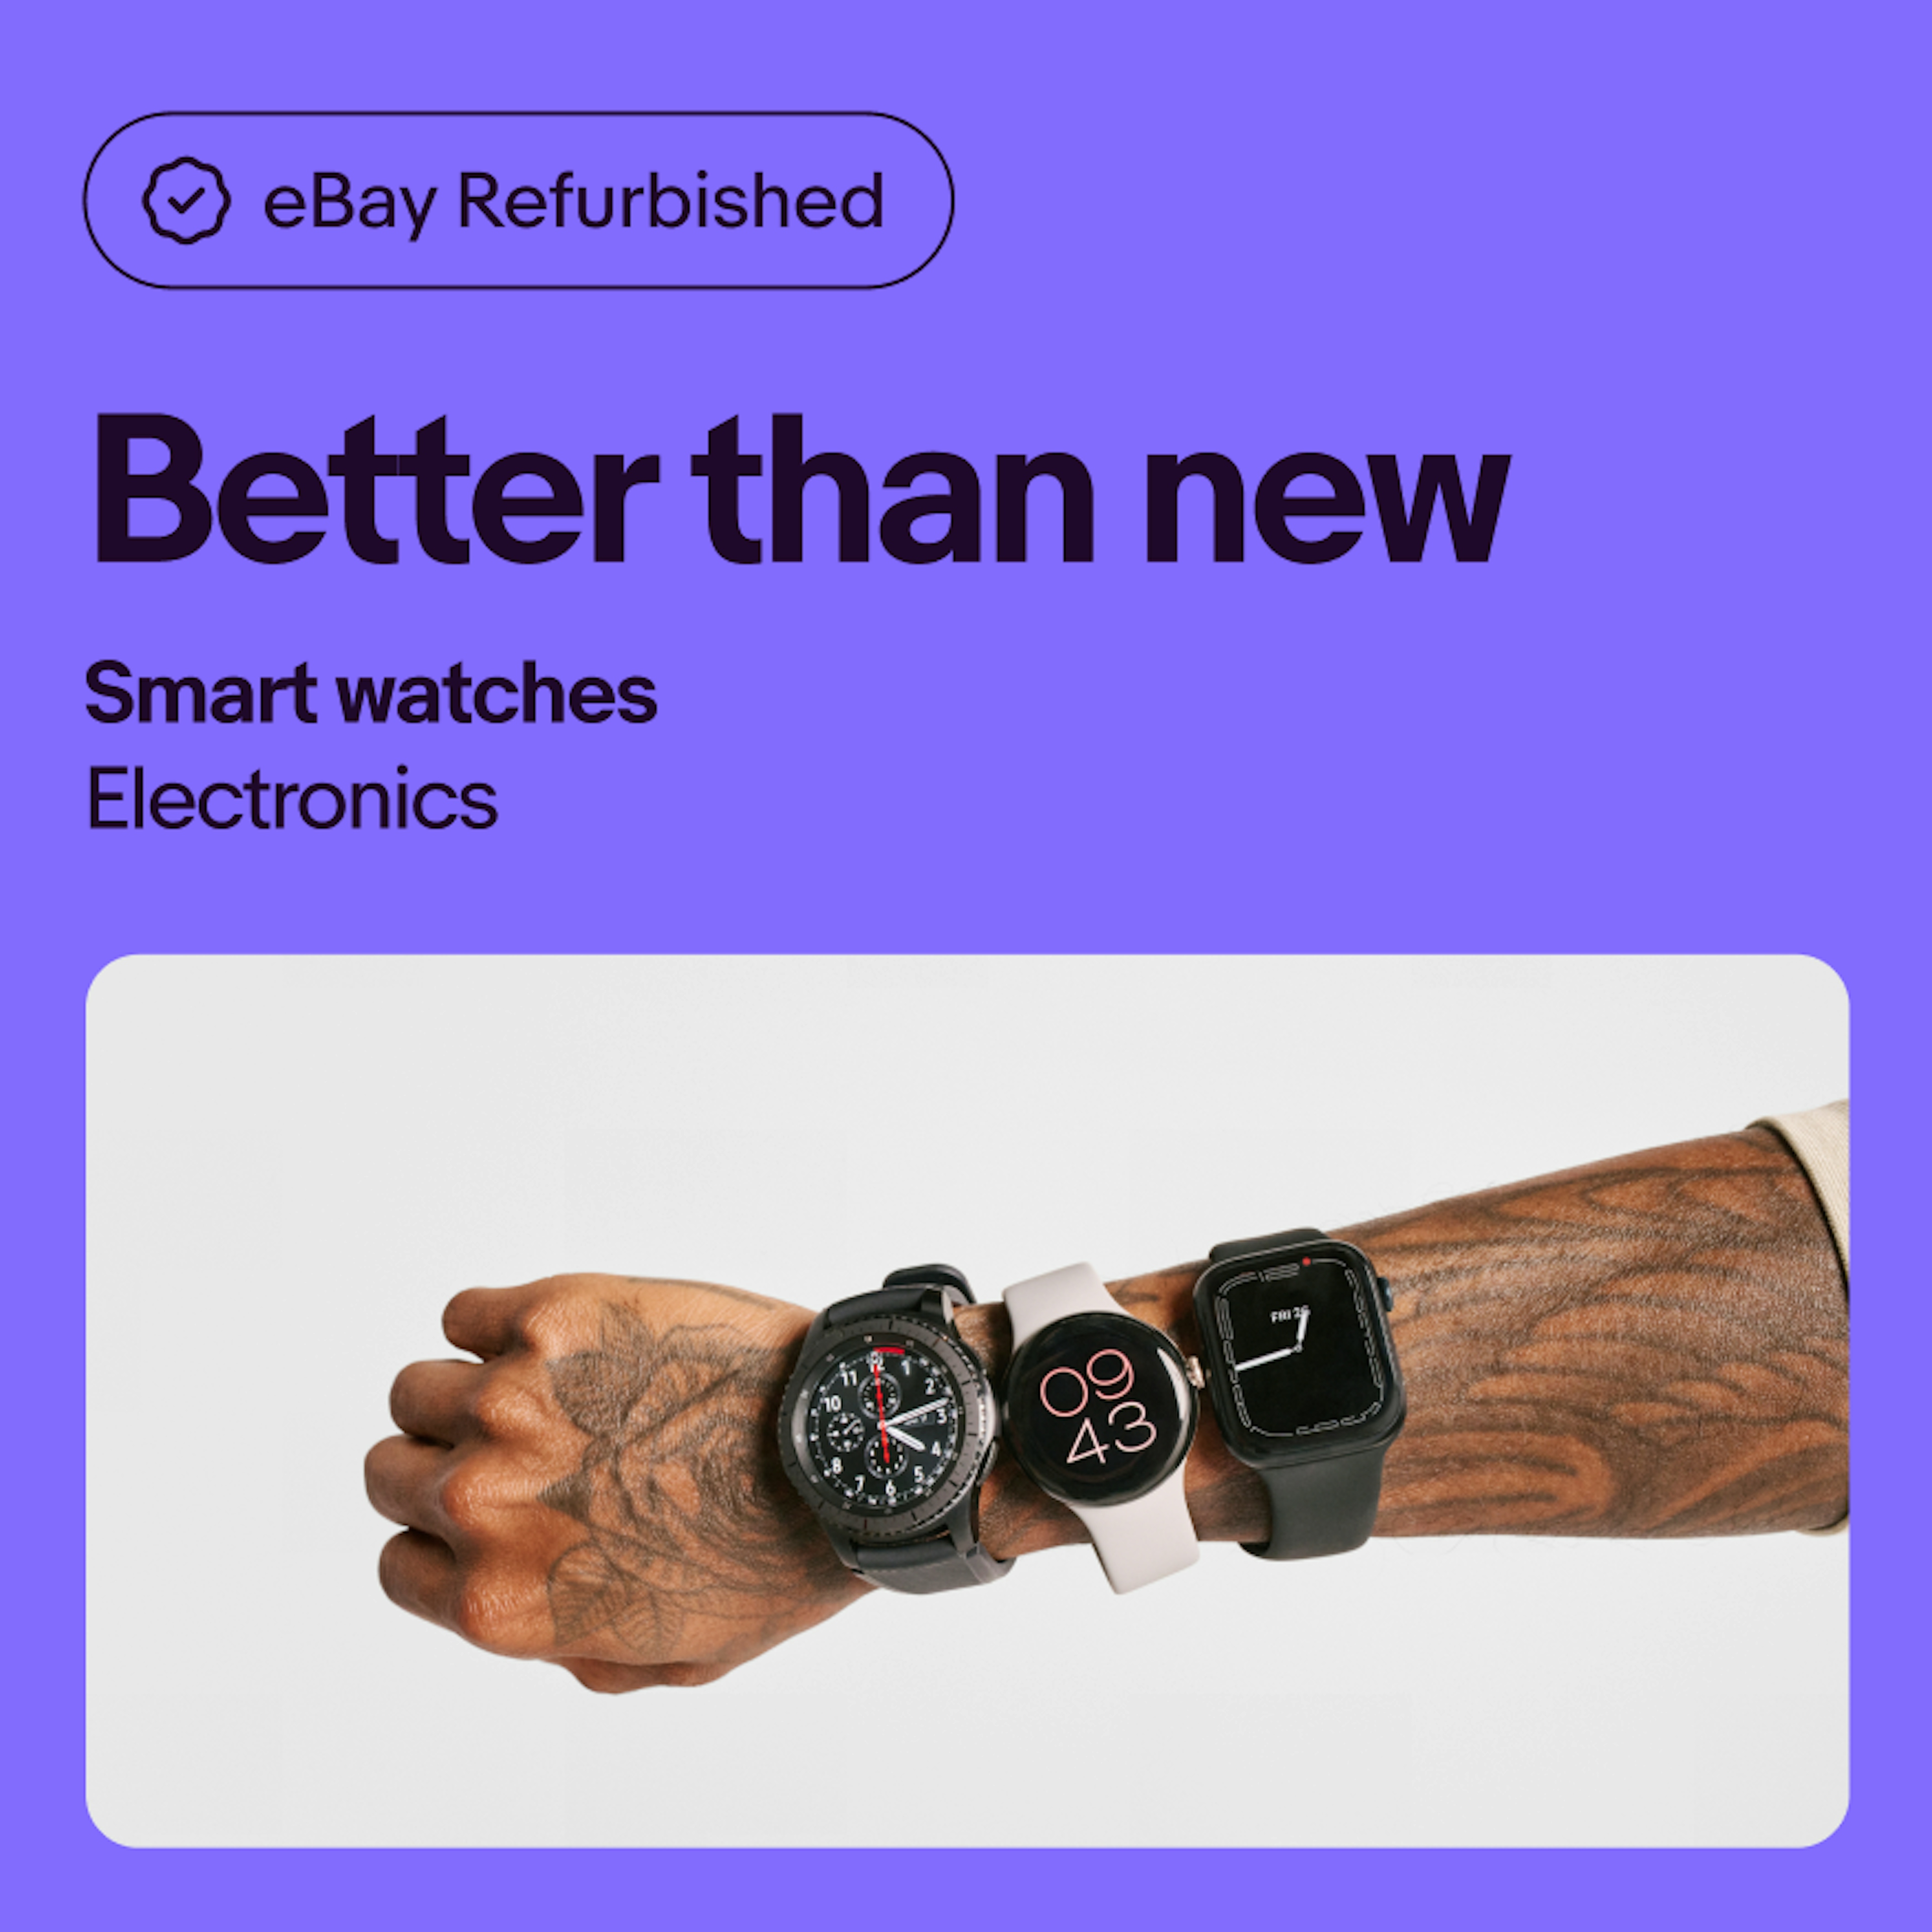  A vibrant purple ad for smart watches. “eBay Refurbished” is placed next to its program icon inside of a pill shape at the top of the layout above the headline “Better than new”.